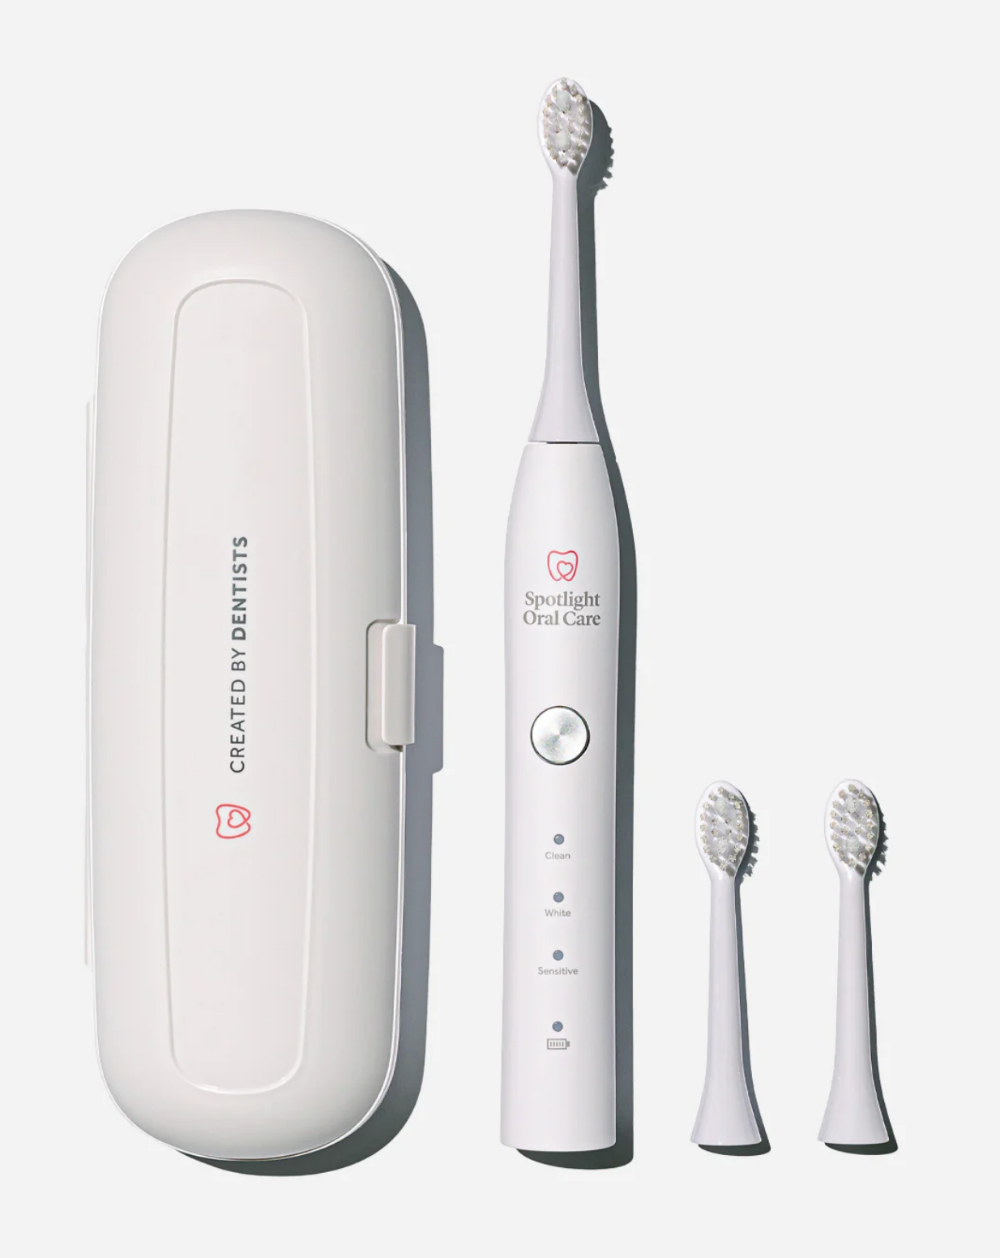 Spotlight Oral Care Spotlight Sonic Toothbrush & Replacements